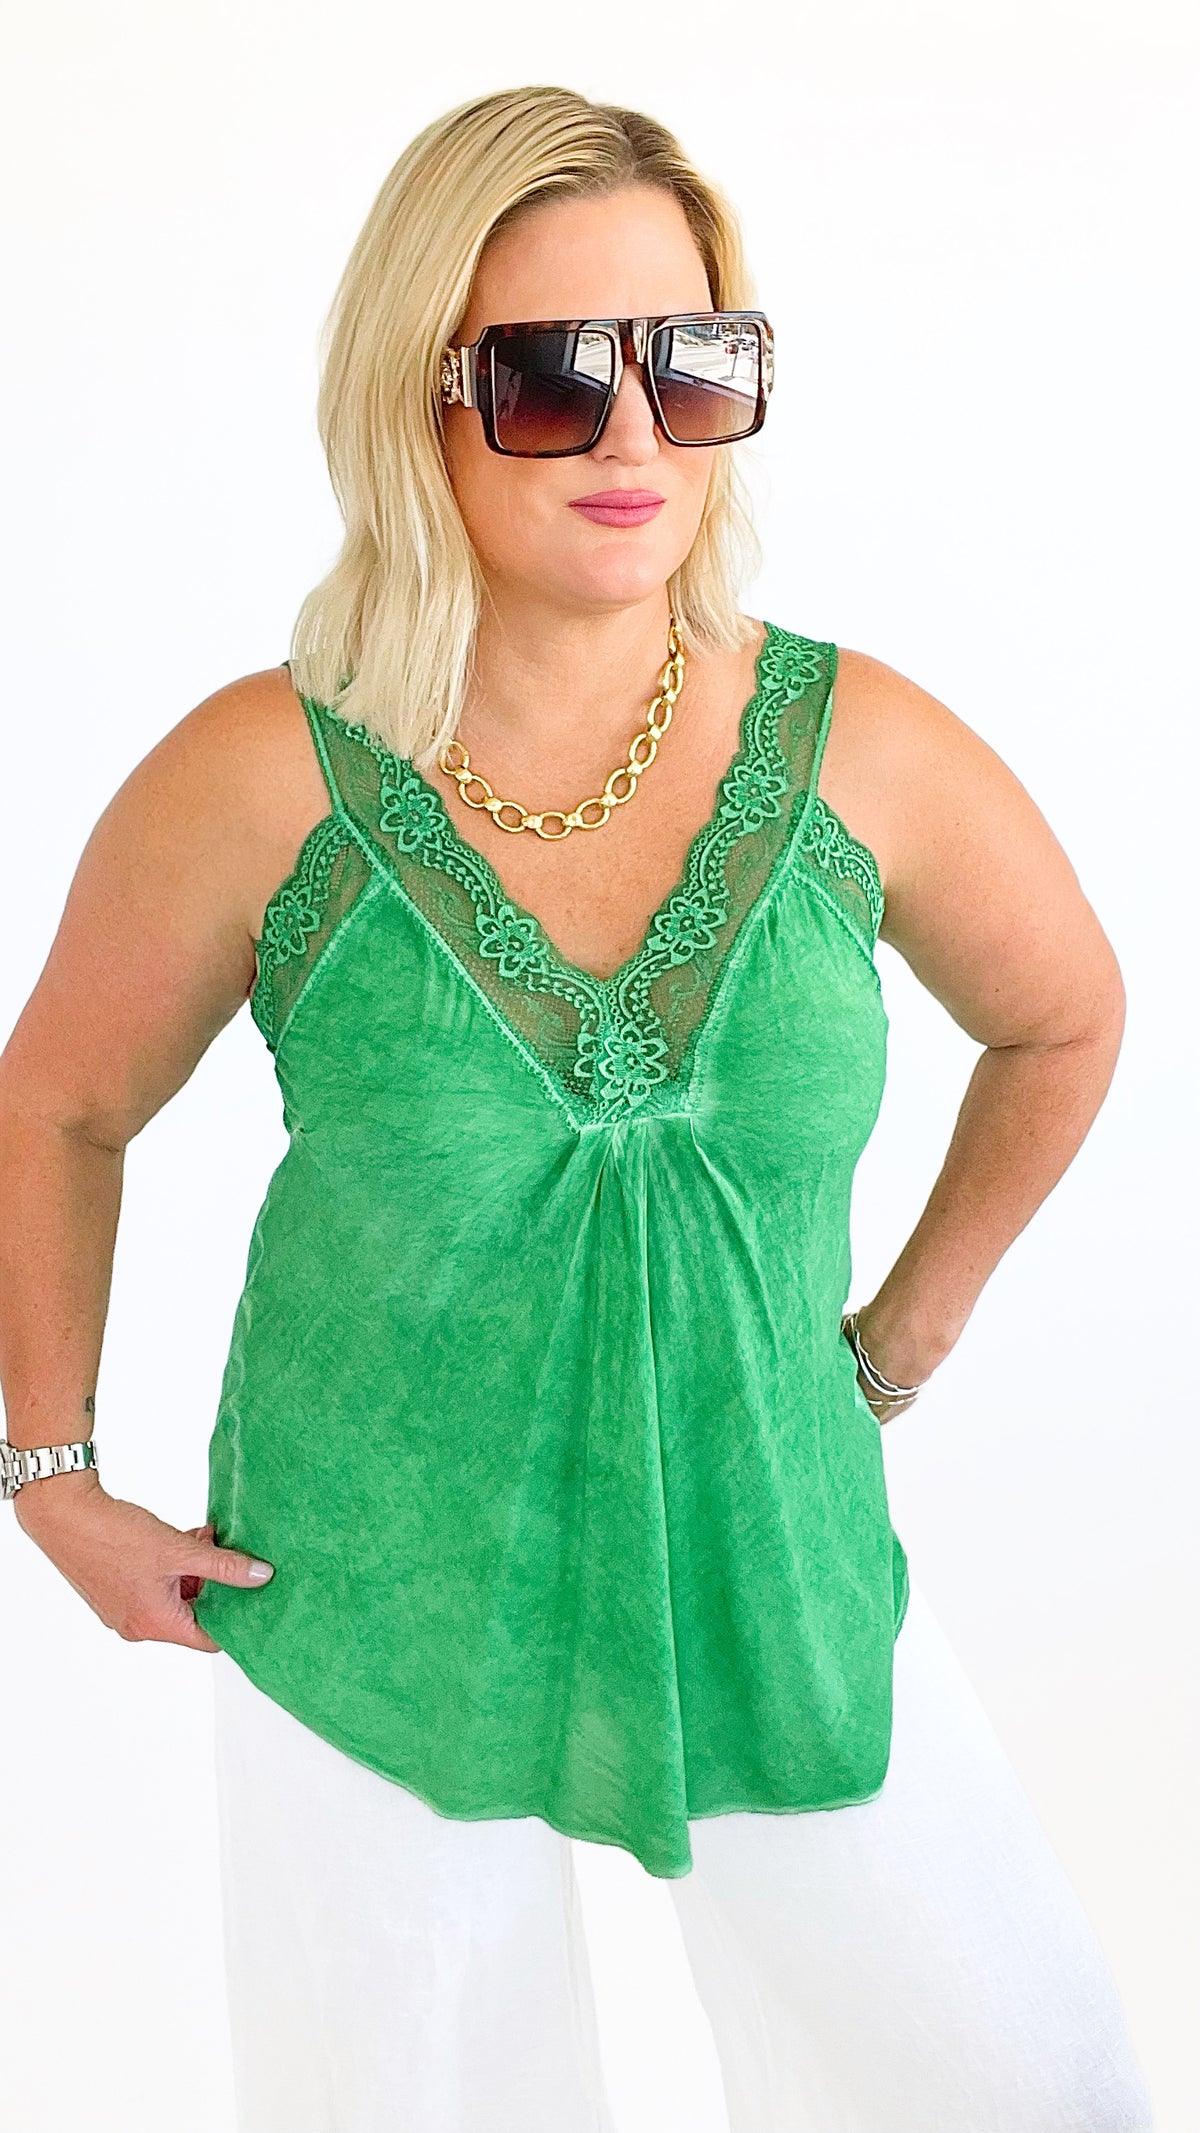 Italian Elegant Lace Trim Cami - Kelly Green-100 Sleeveless Tops-Yolly-Coastal Bloom Boutique, find the trendiest versions of the popular styles and looks Located in Indialantic, FL